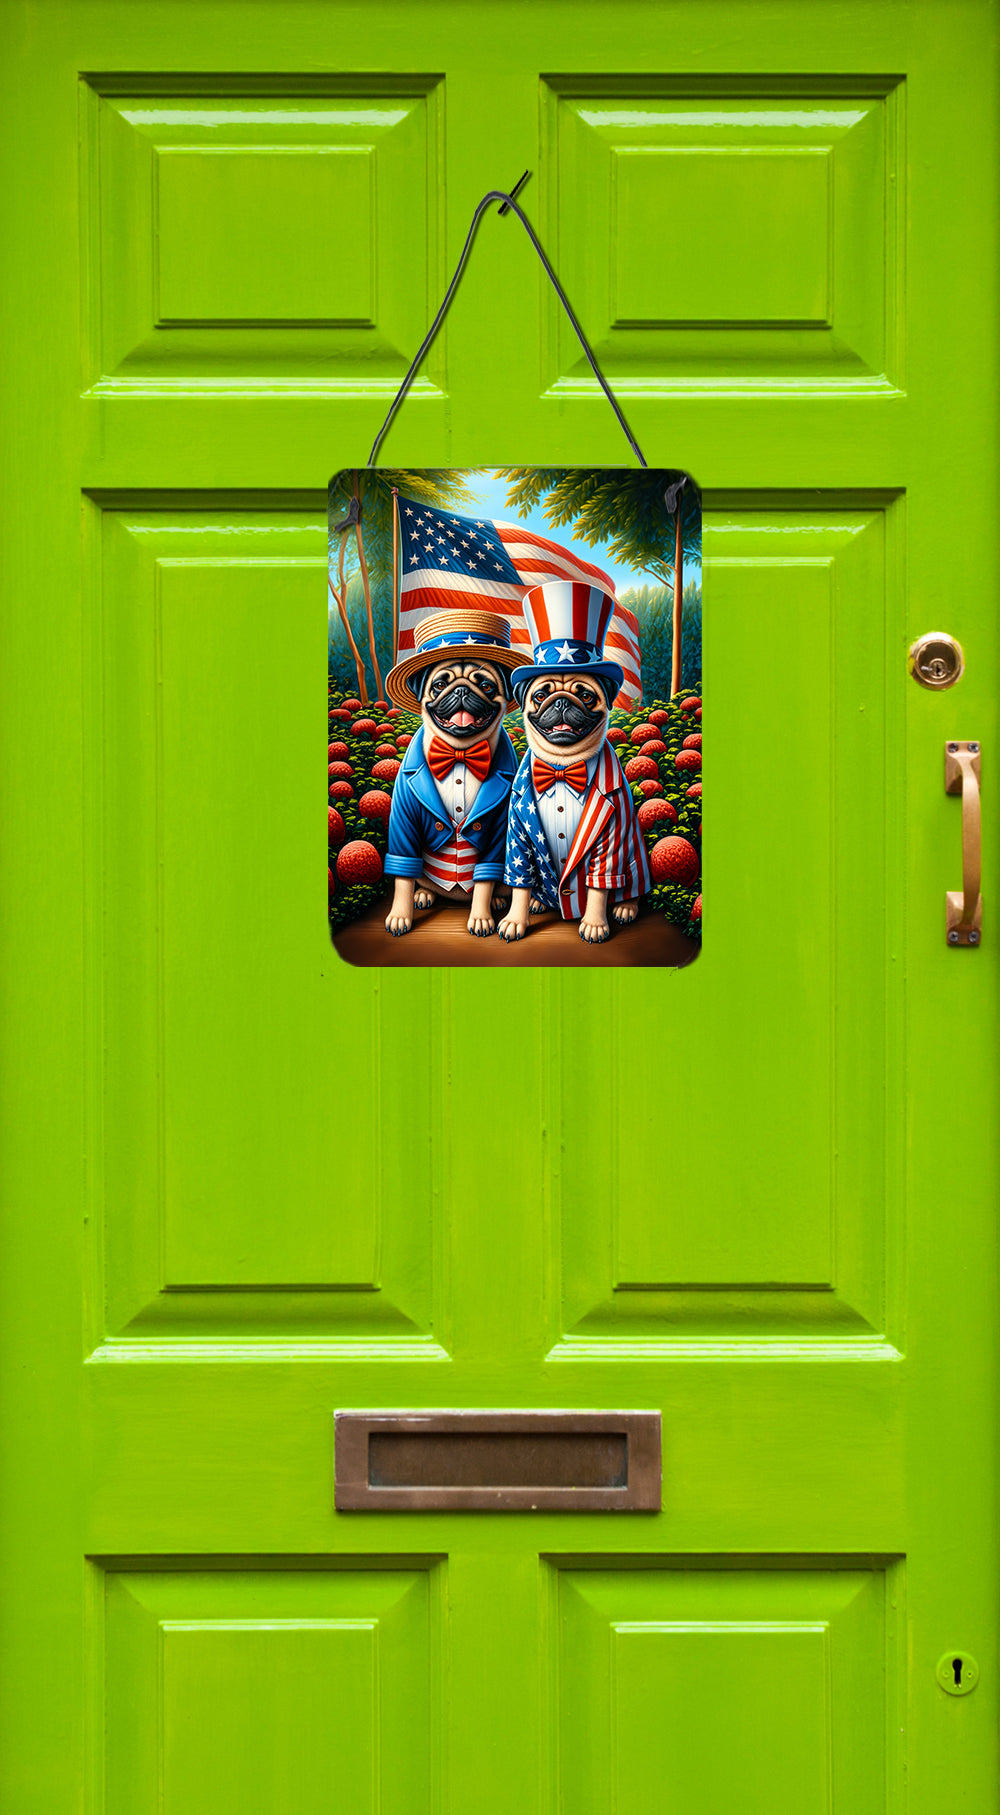 Buy this All American Pug Wall or Door Hanging Prints